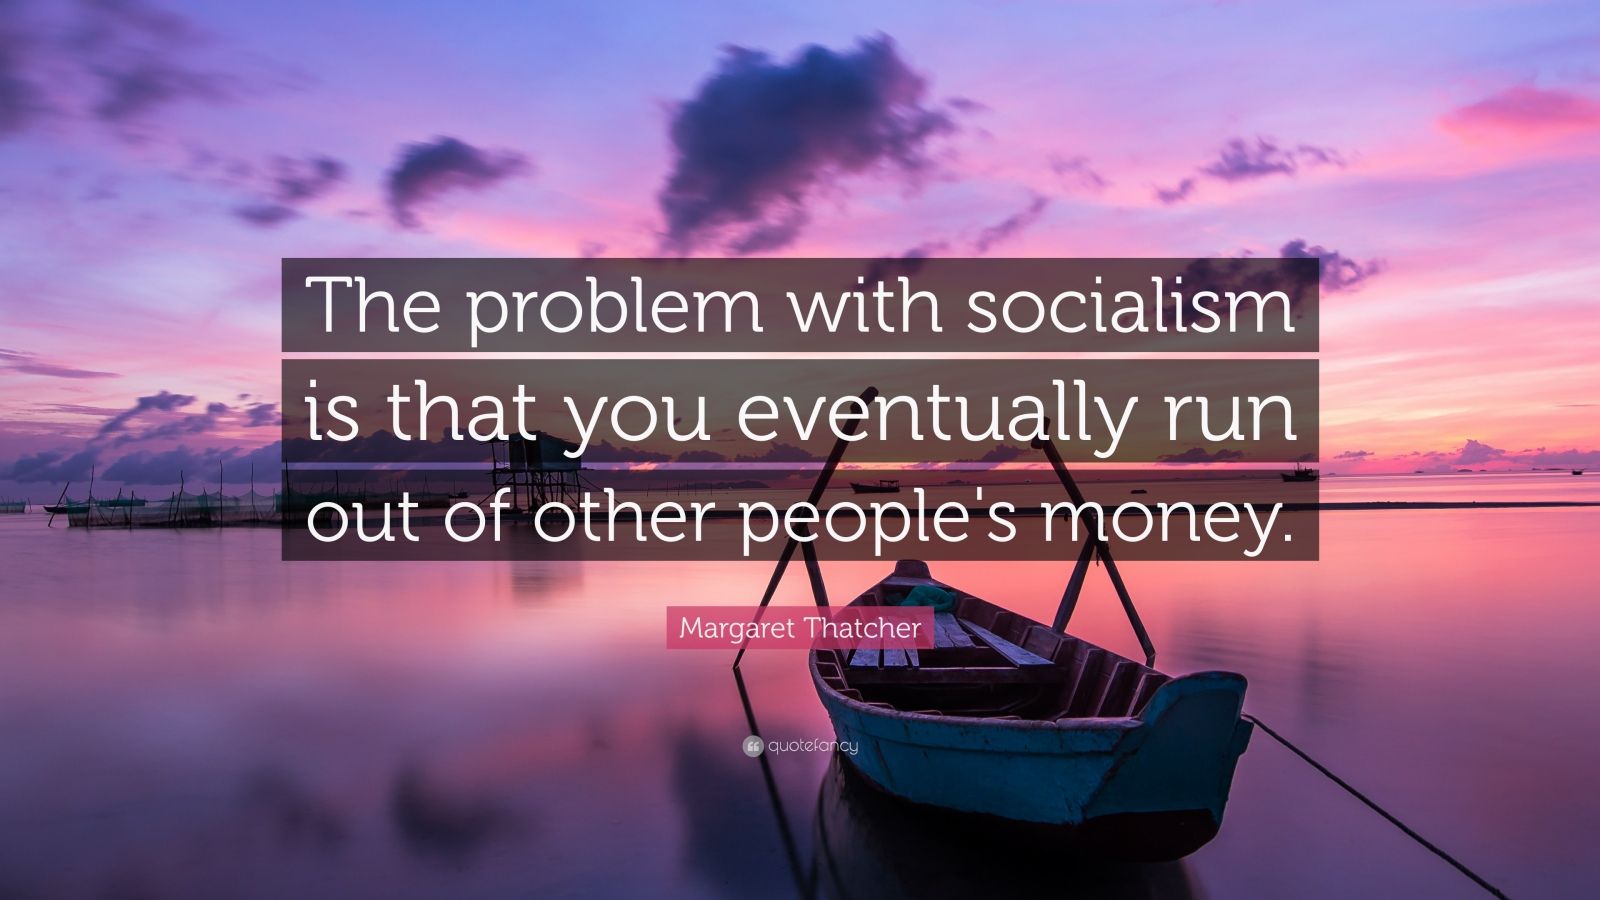 Margaret Thatcher Quote “The problem with socialism is